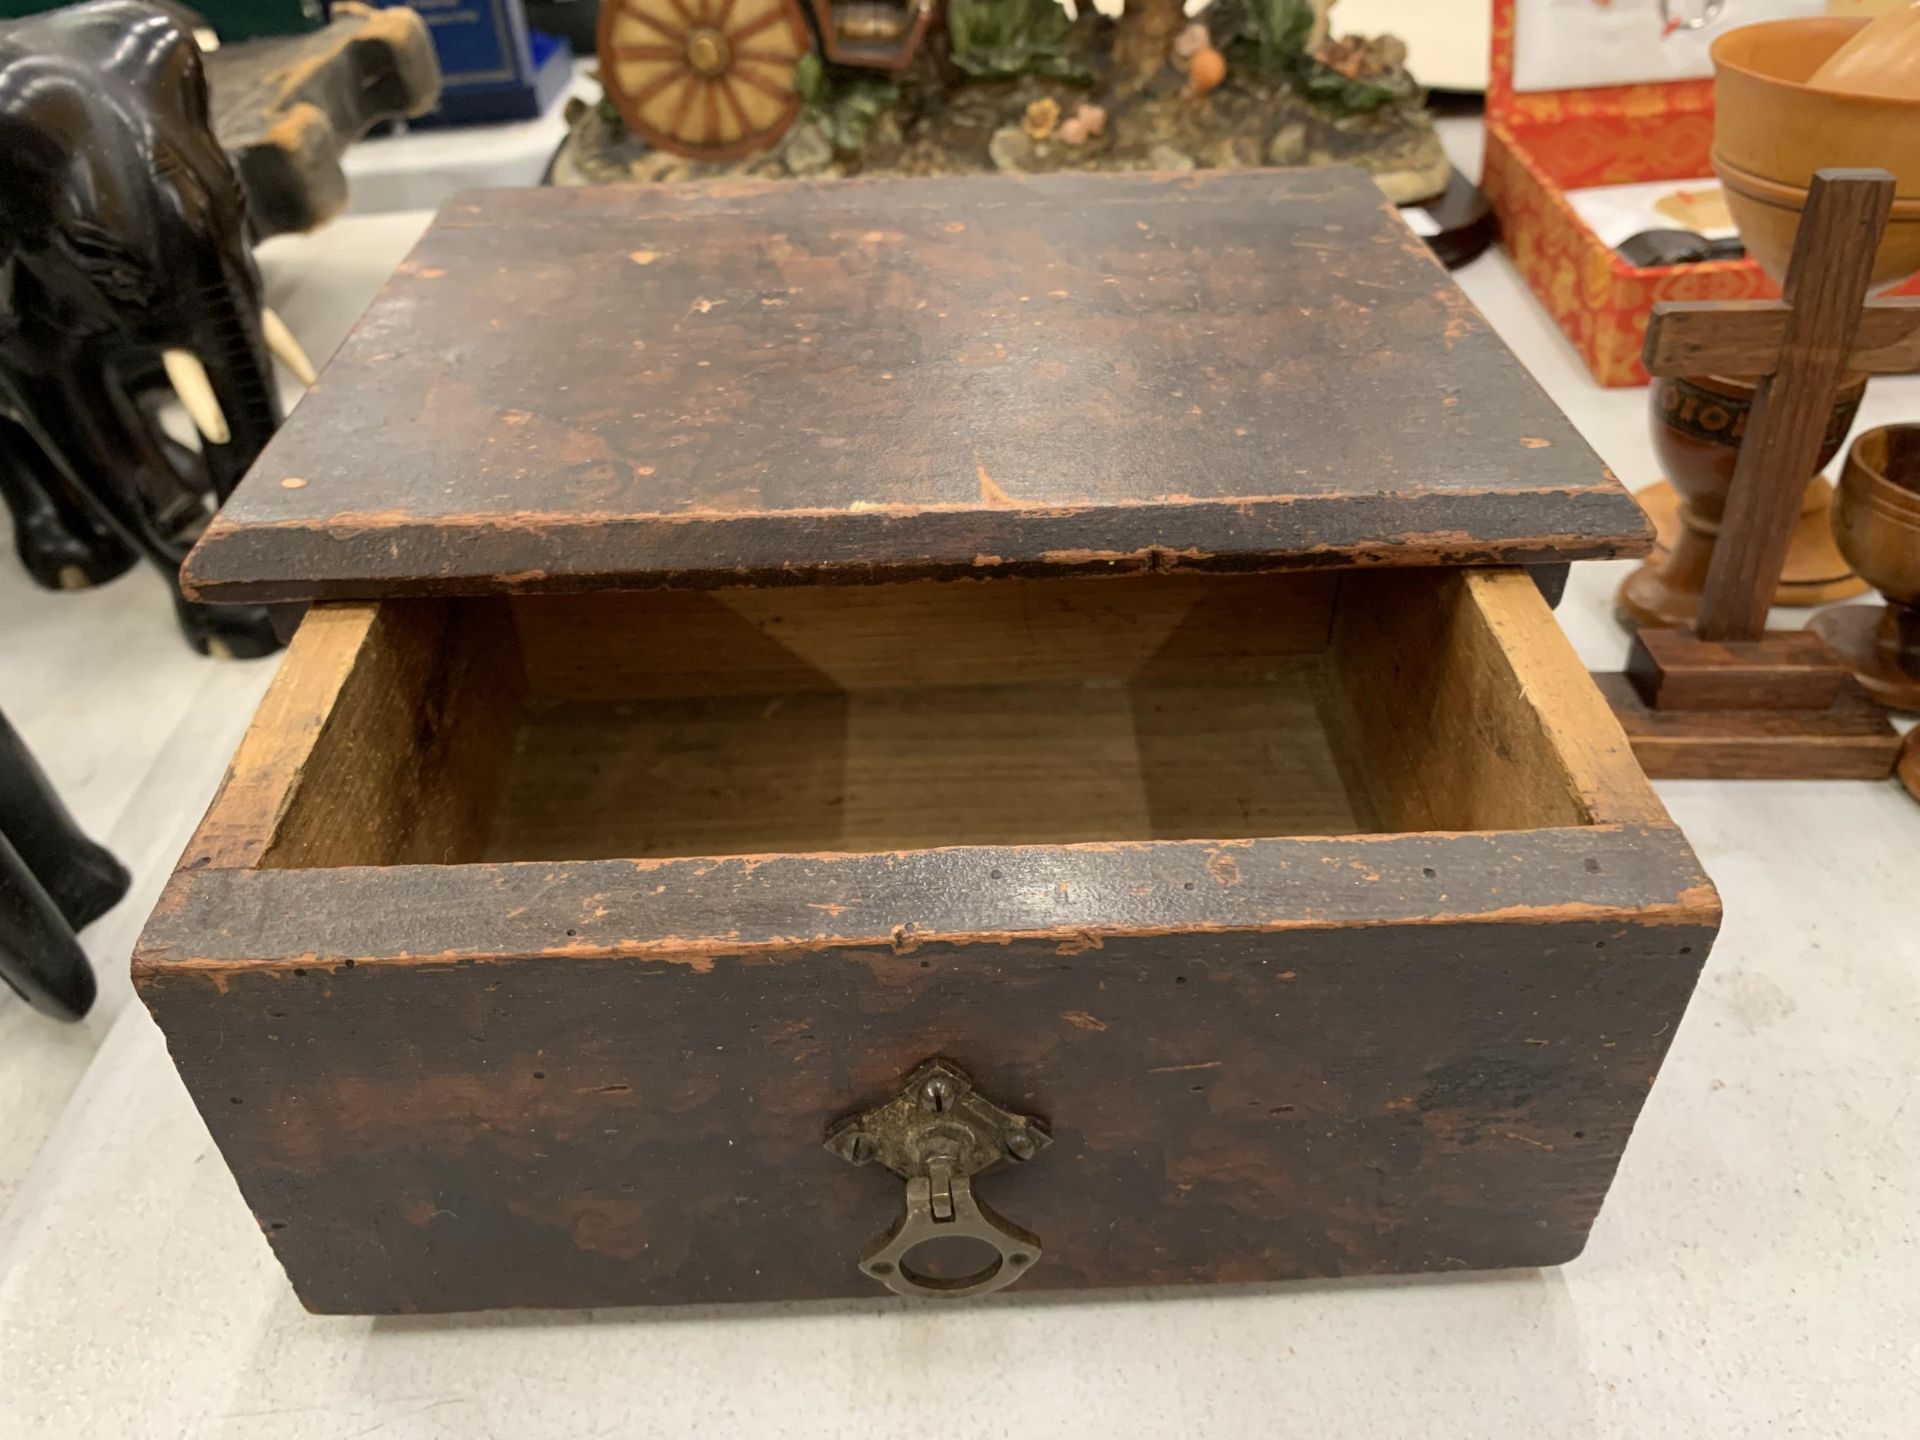 TWO VINTAGE WOODEN BOXES TO INCLUDE A CIGARETTE DISPENSER - Image 2 of 3